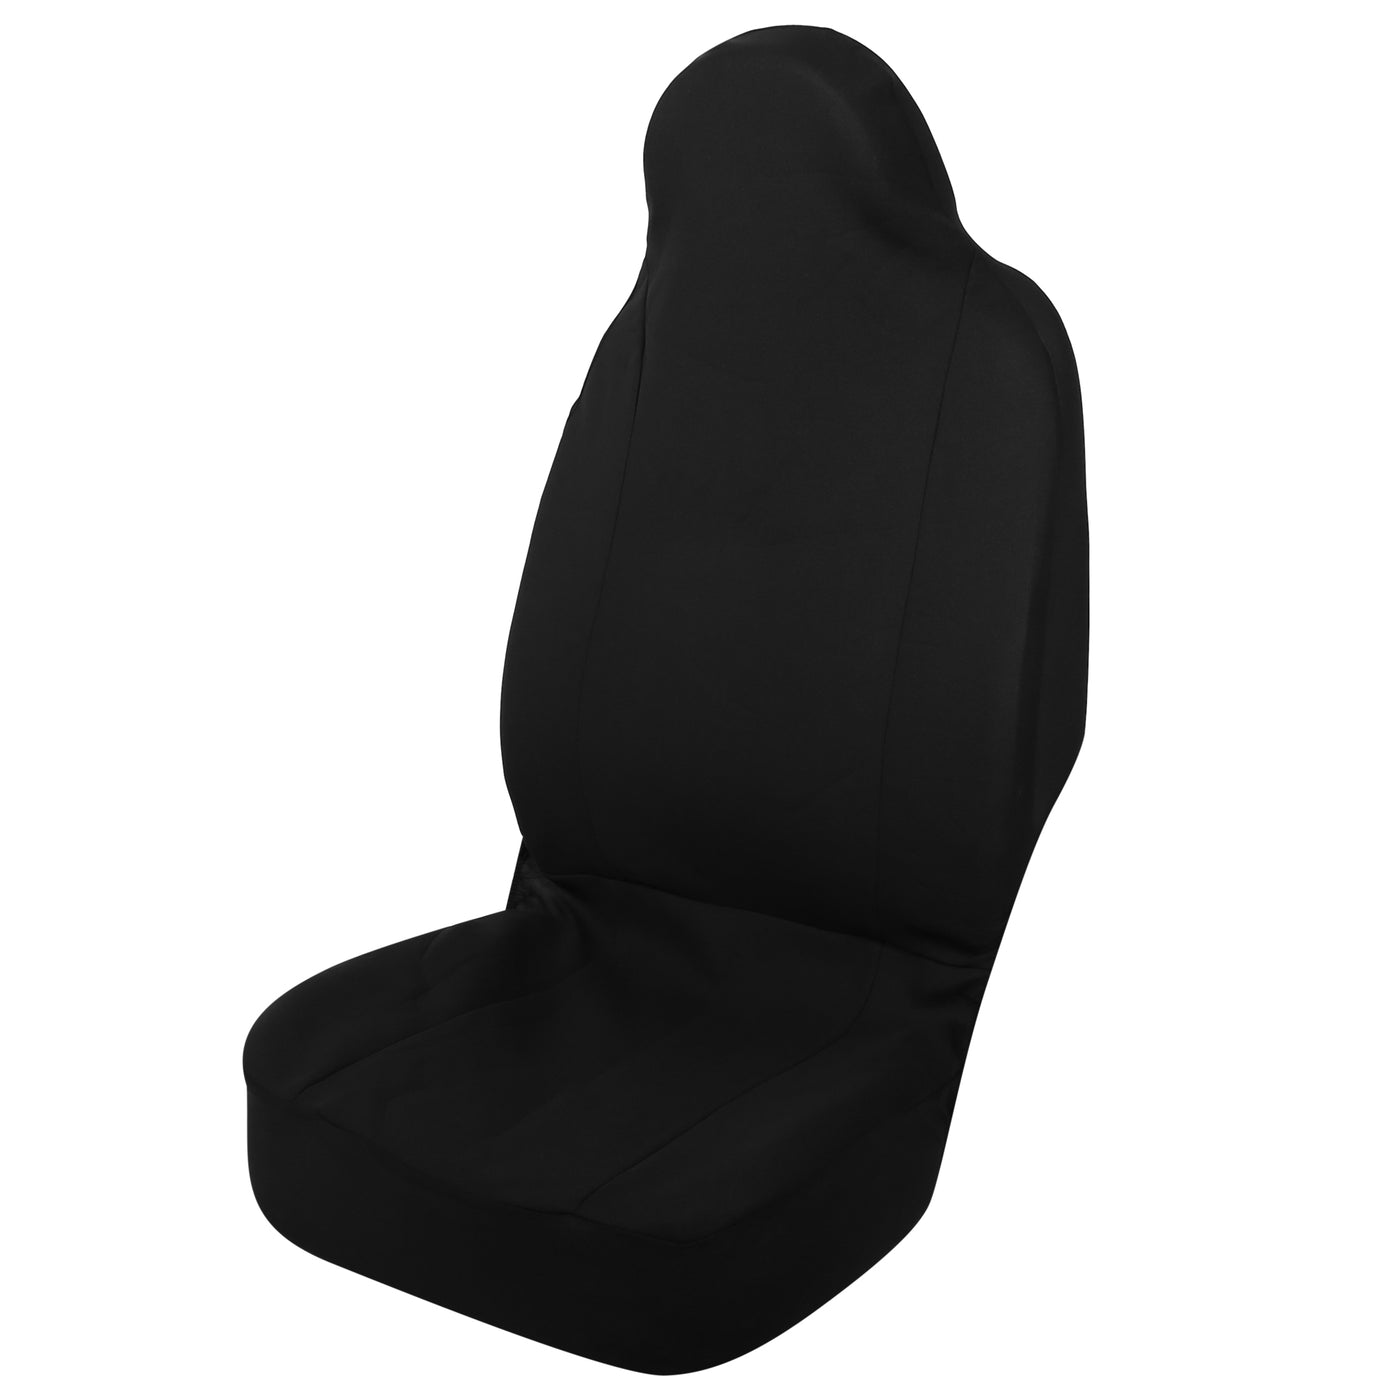 X AUTOHAUX Front Seat Covers Protector Polyester Seat Cover Protector Pad Universal for Car Truck SUV Black